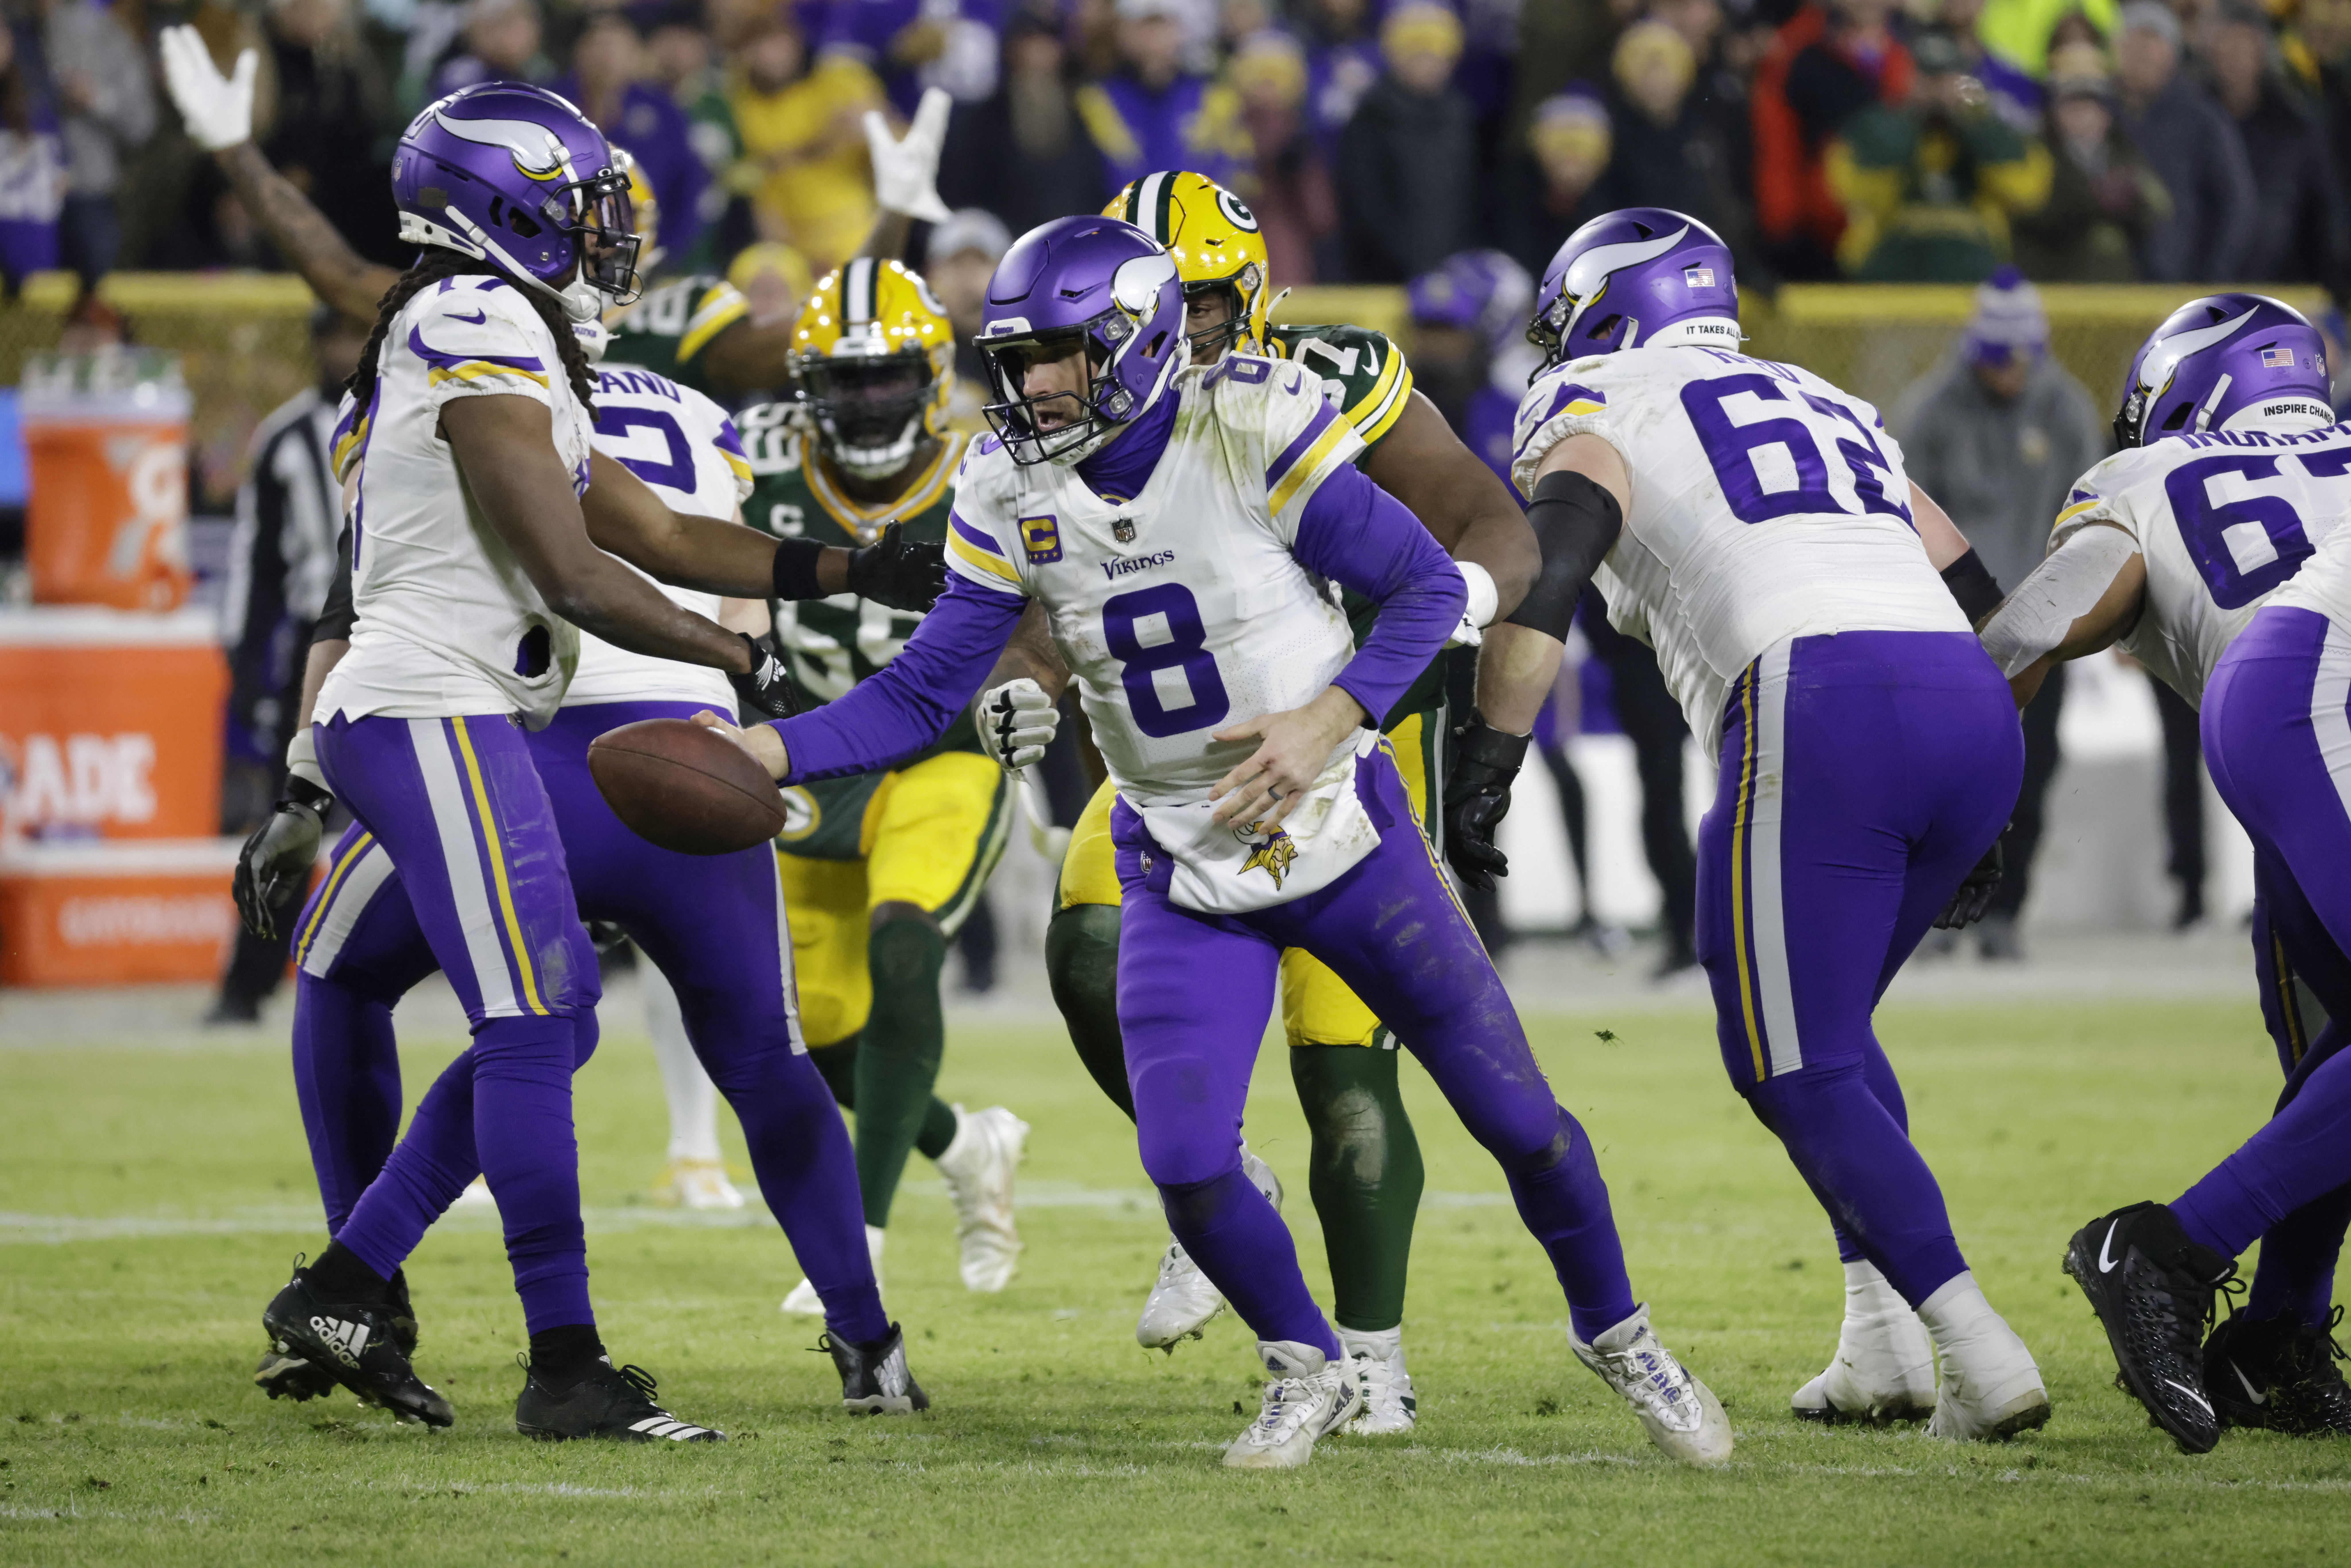 Vikings vs. Bears live stream: TV channel, how to watch